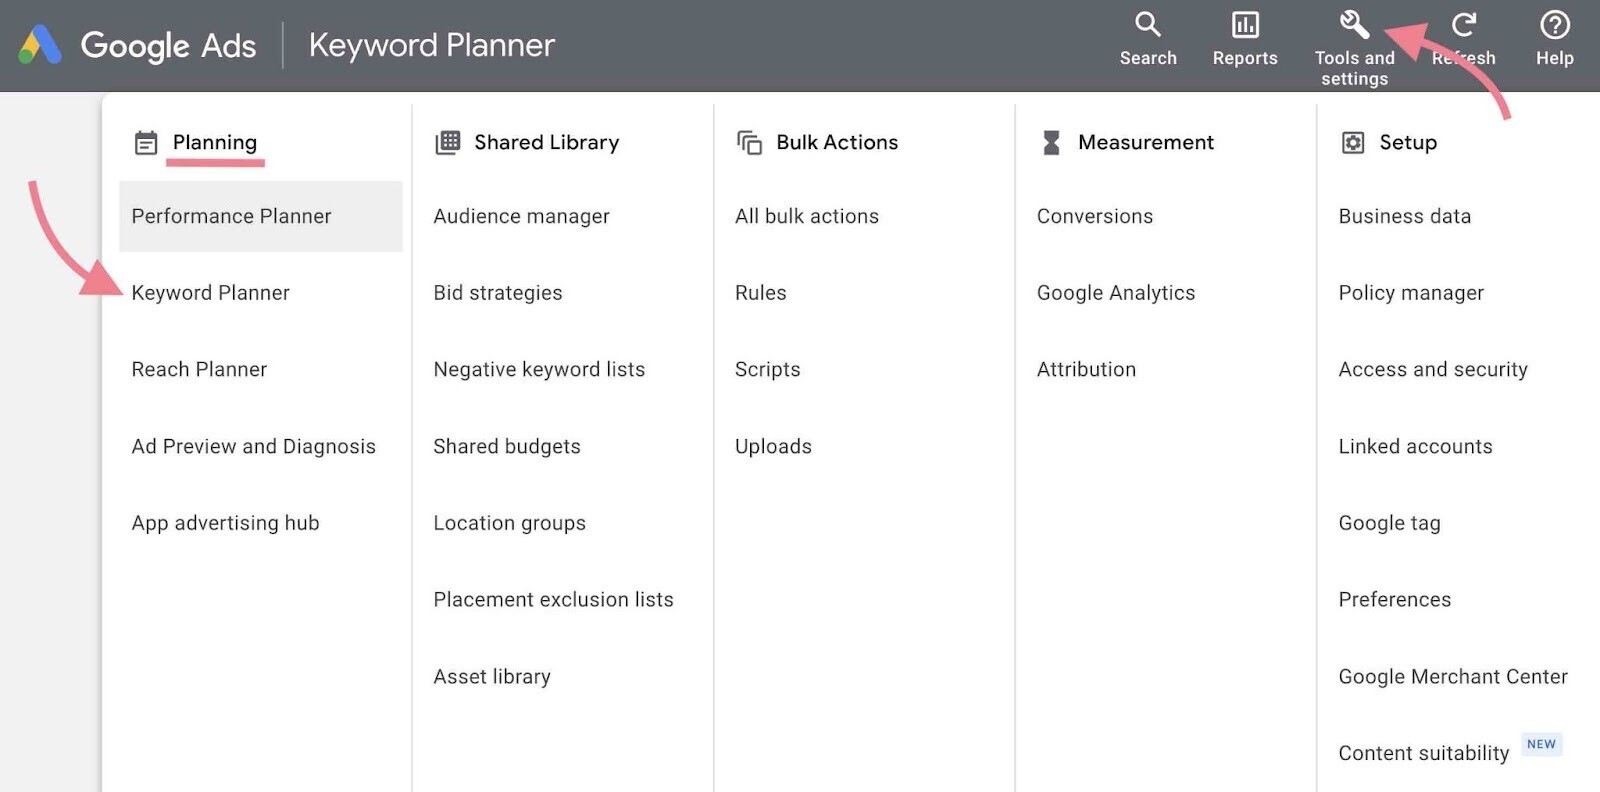 Google Keyword Planner: How To Use It To Find Keywords